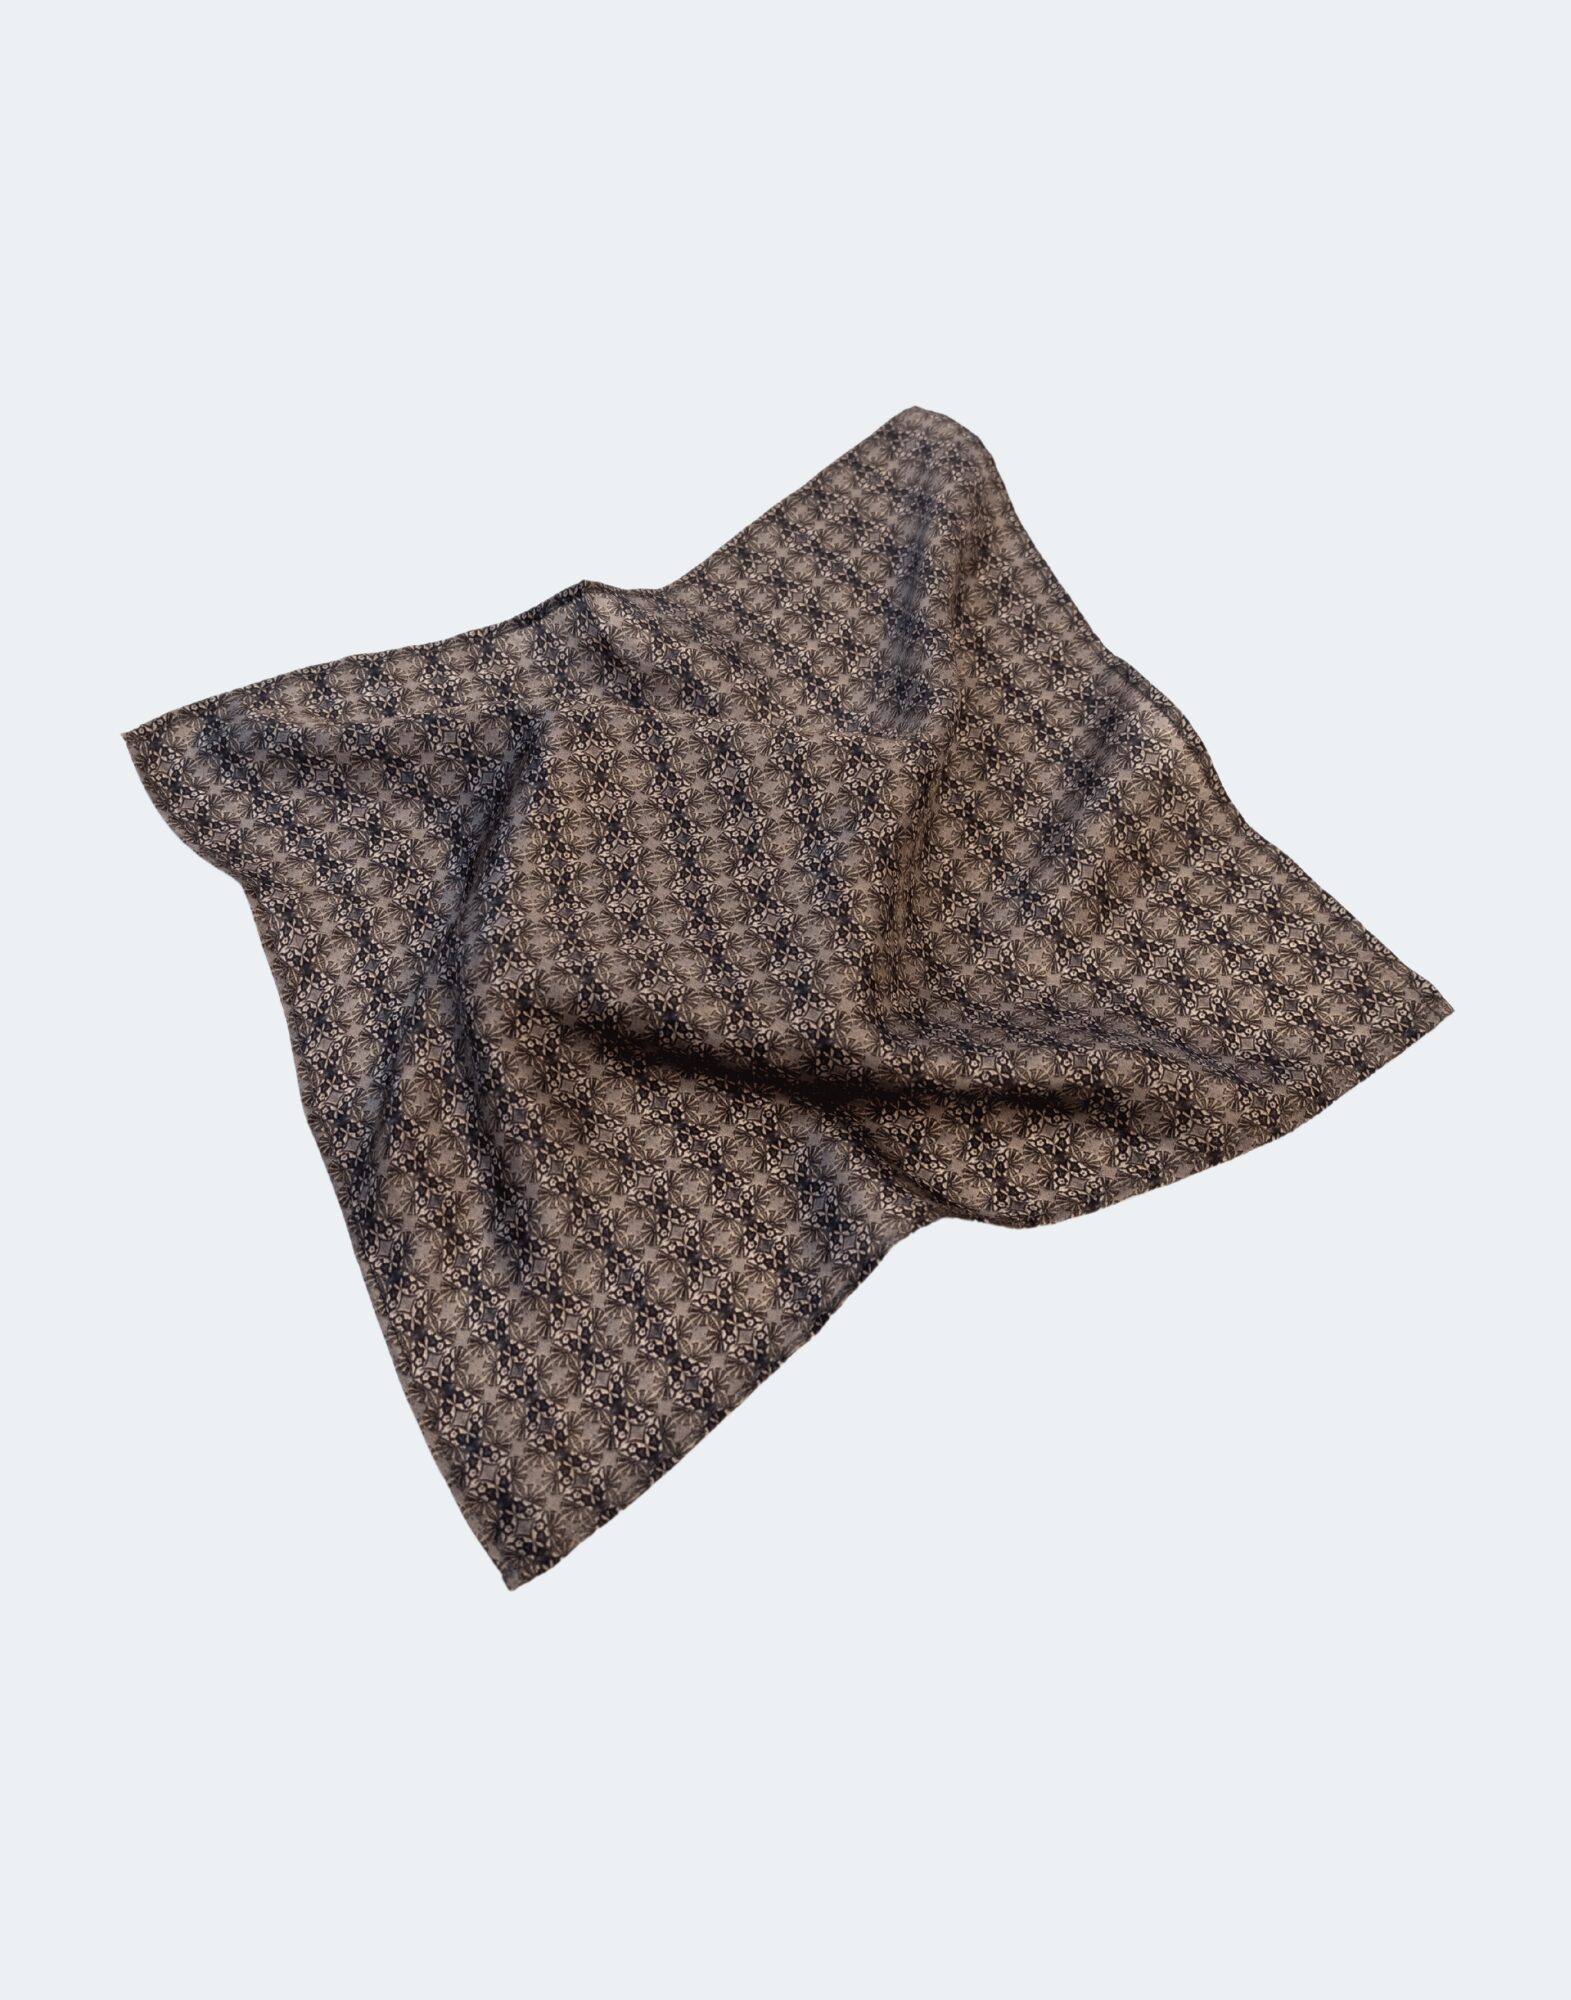 flat laid pocket square with circular pattern in deep browns and blacks